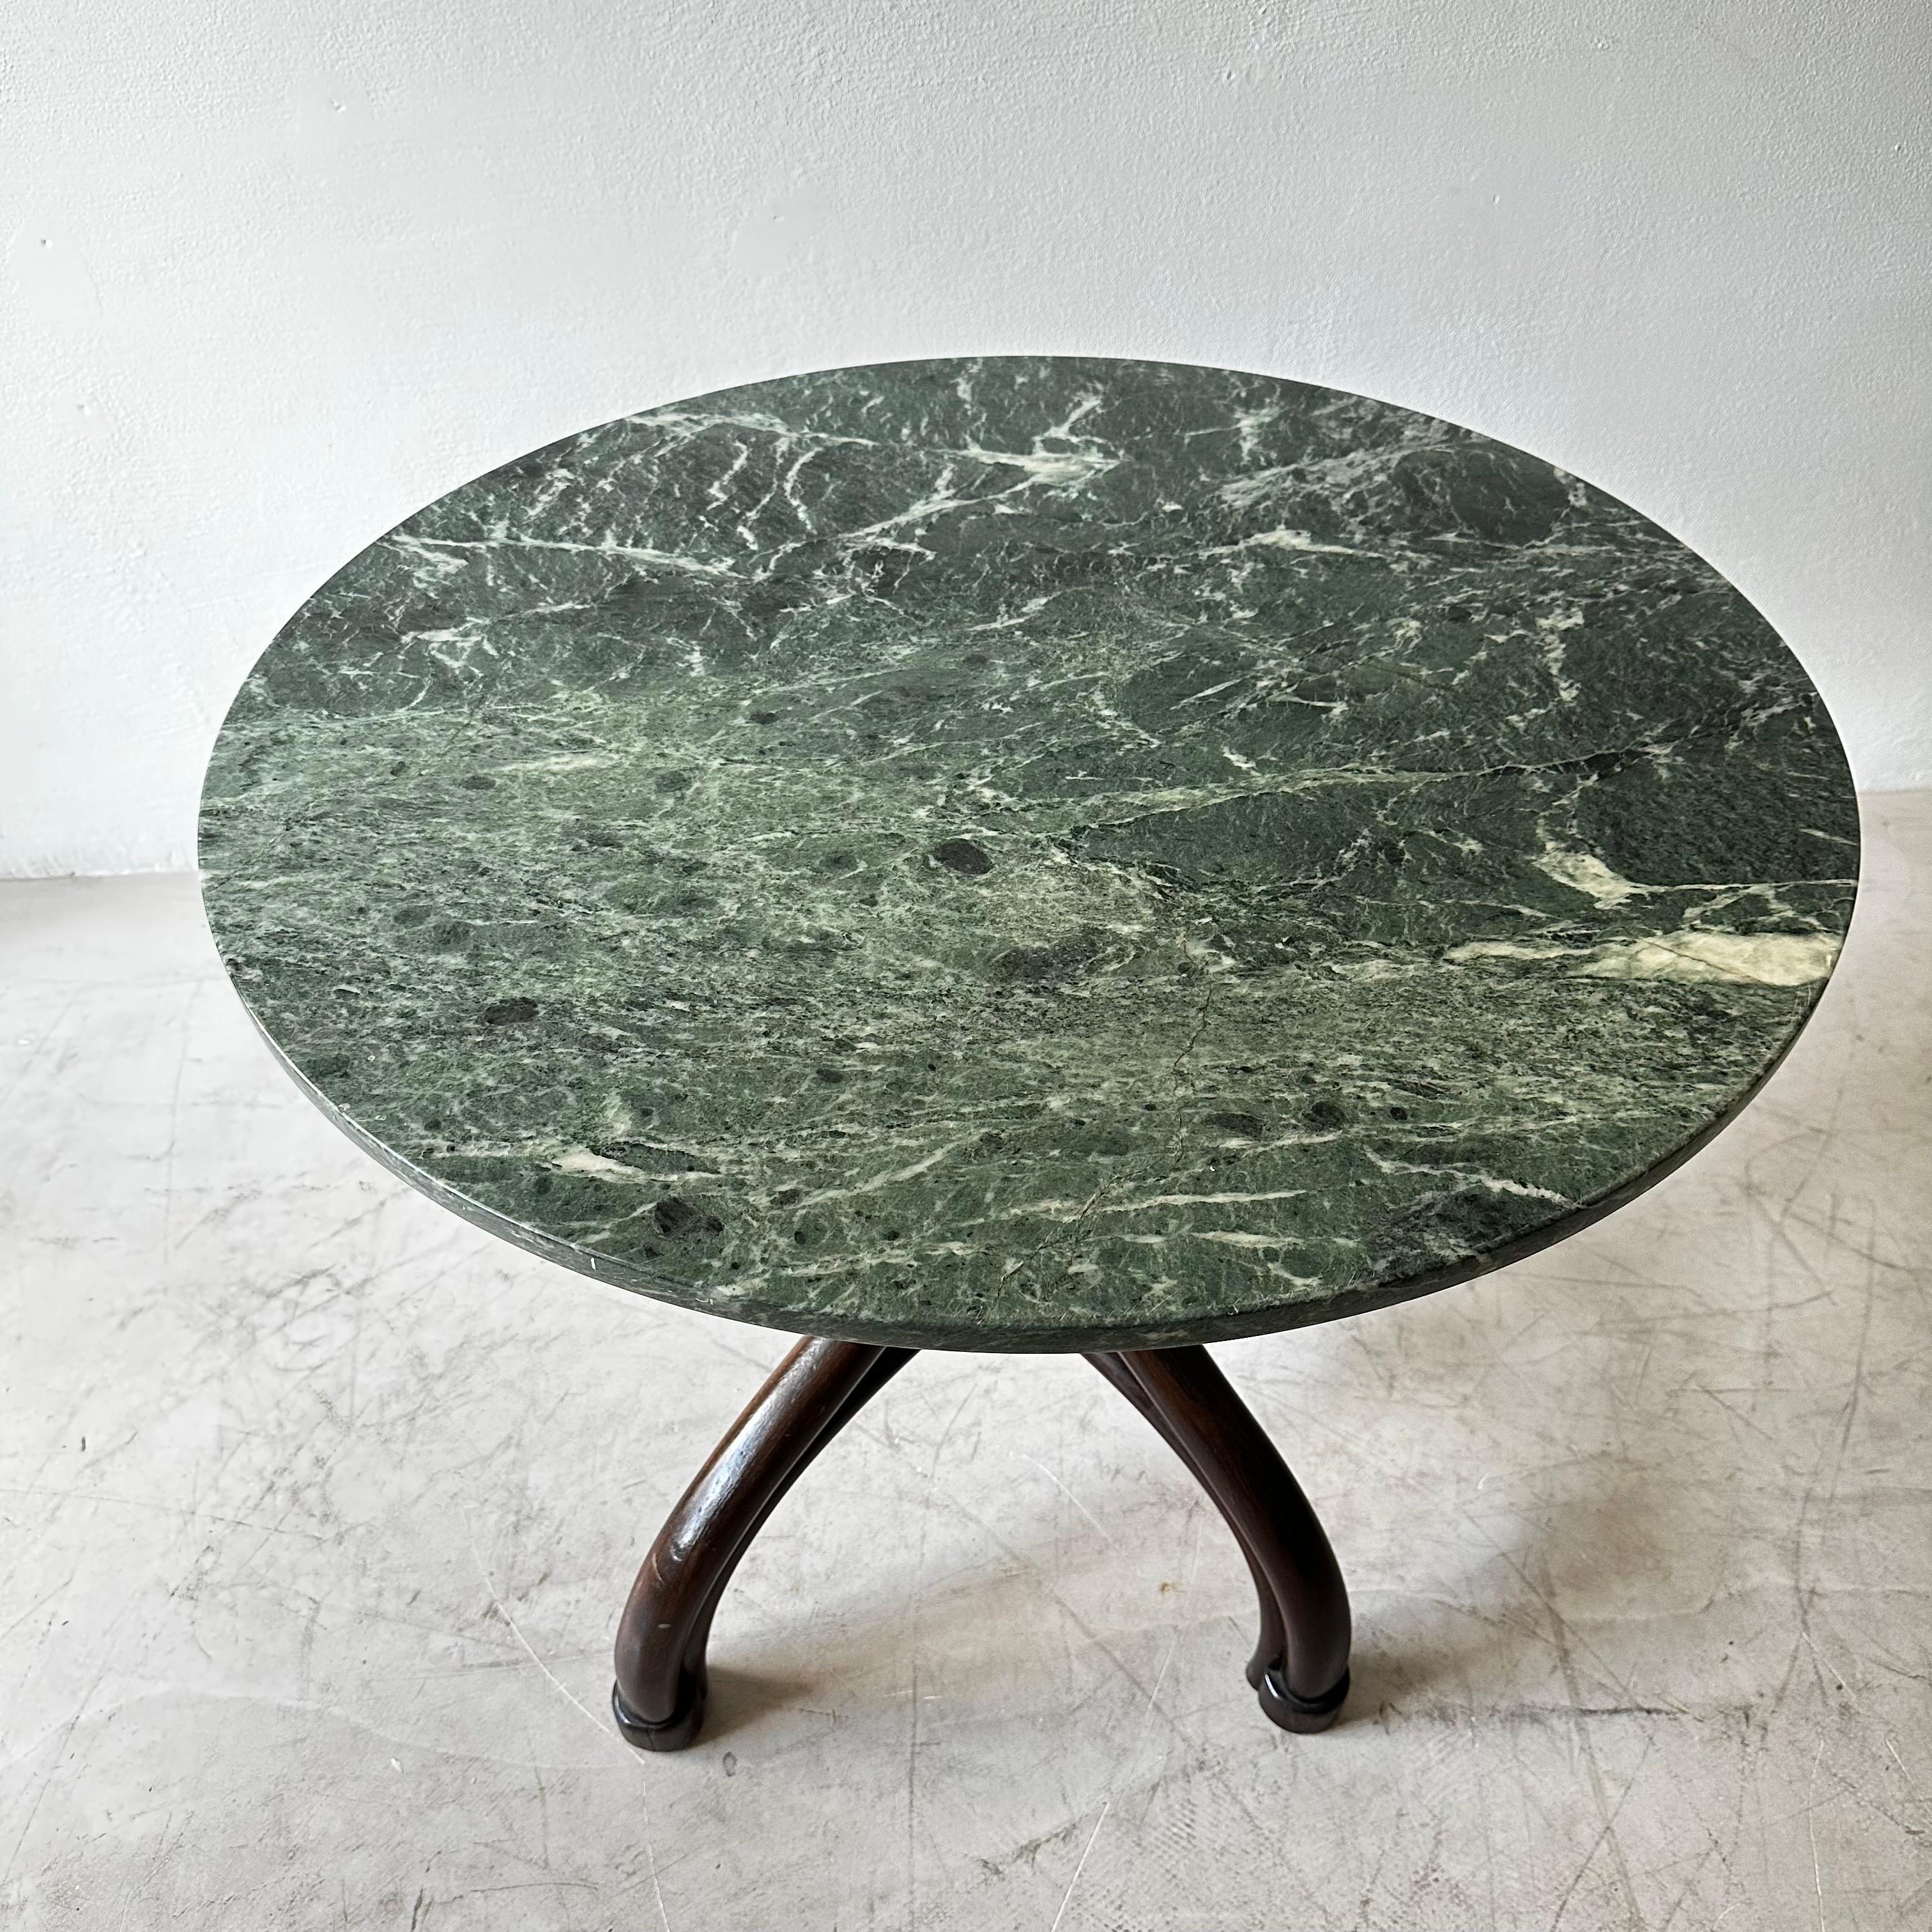 Adolf Loos Cafe Museum Center Hall Table with Green Marble Top, Austria 1910 For Sale 8